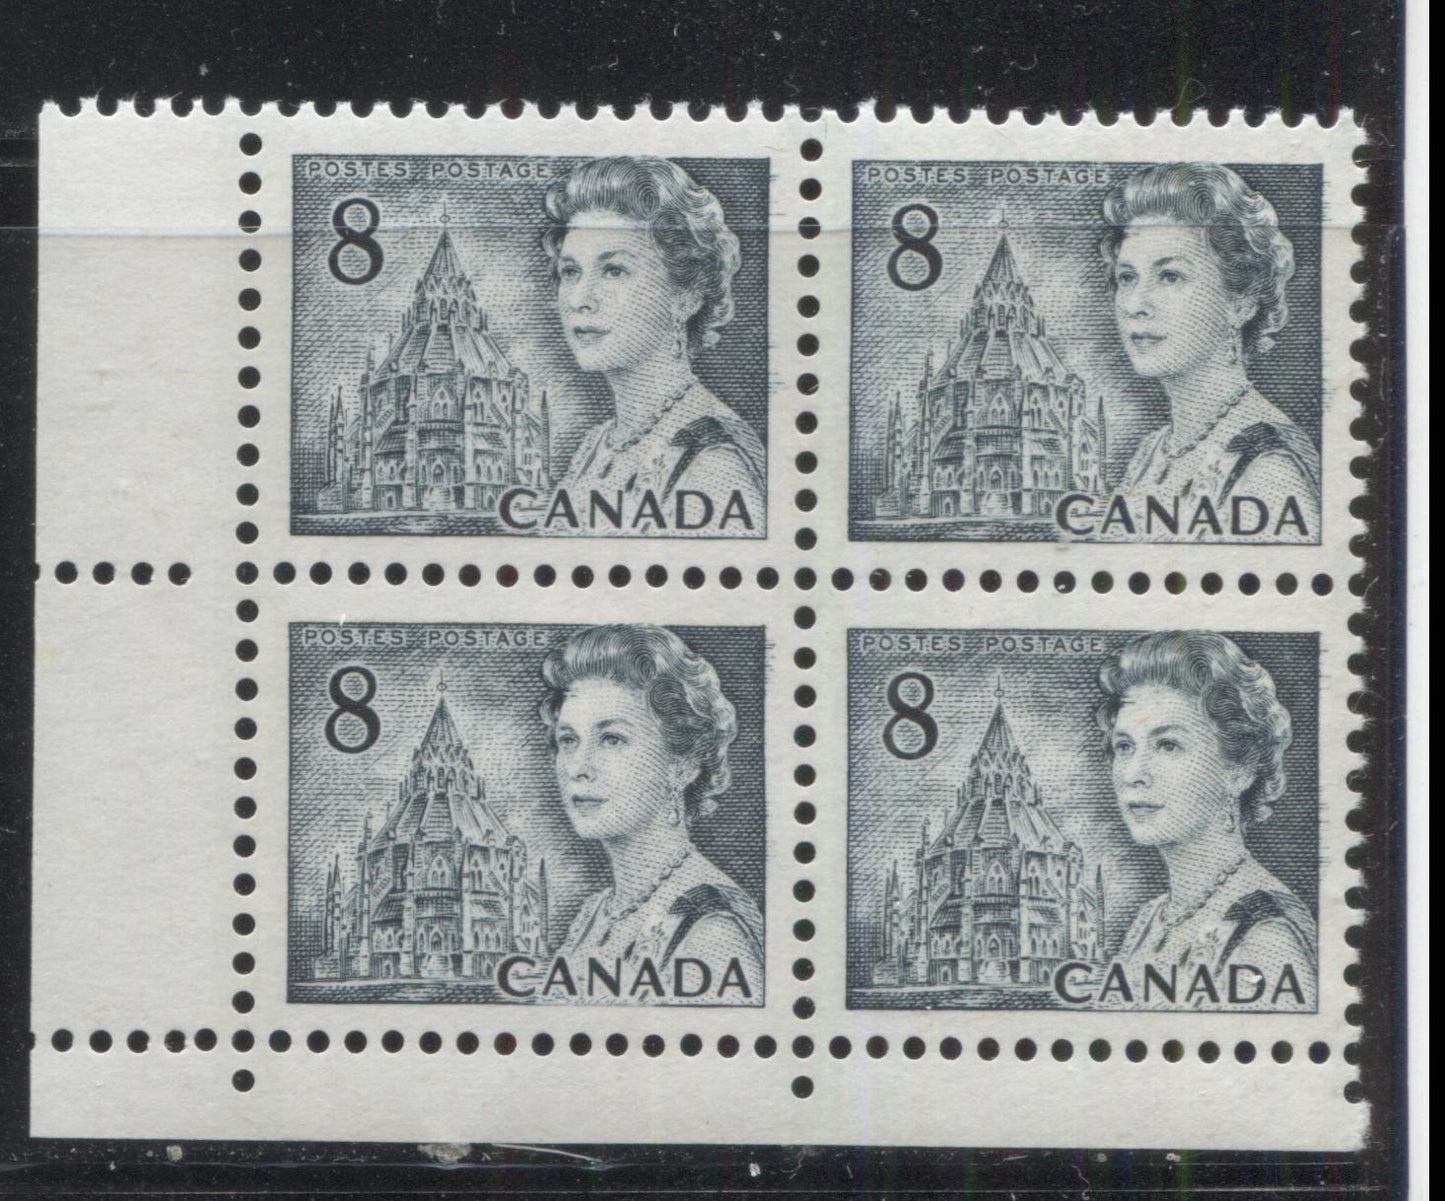 Lot 173 Canada #544pviiiver 8c Slate Queen Elizabeth II, 1967-1973 Centennial Issue, A VFNH LL GT2 Tagged Field Stock Block Of 4 On HF-fl (7) Smooth Paper With Satin PVA Gum, Scratch on Forehead Variety